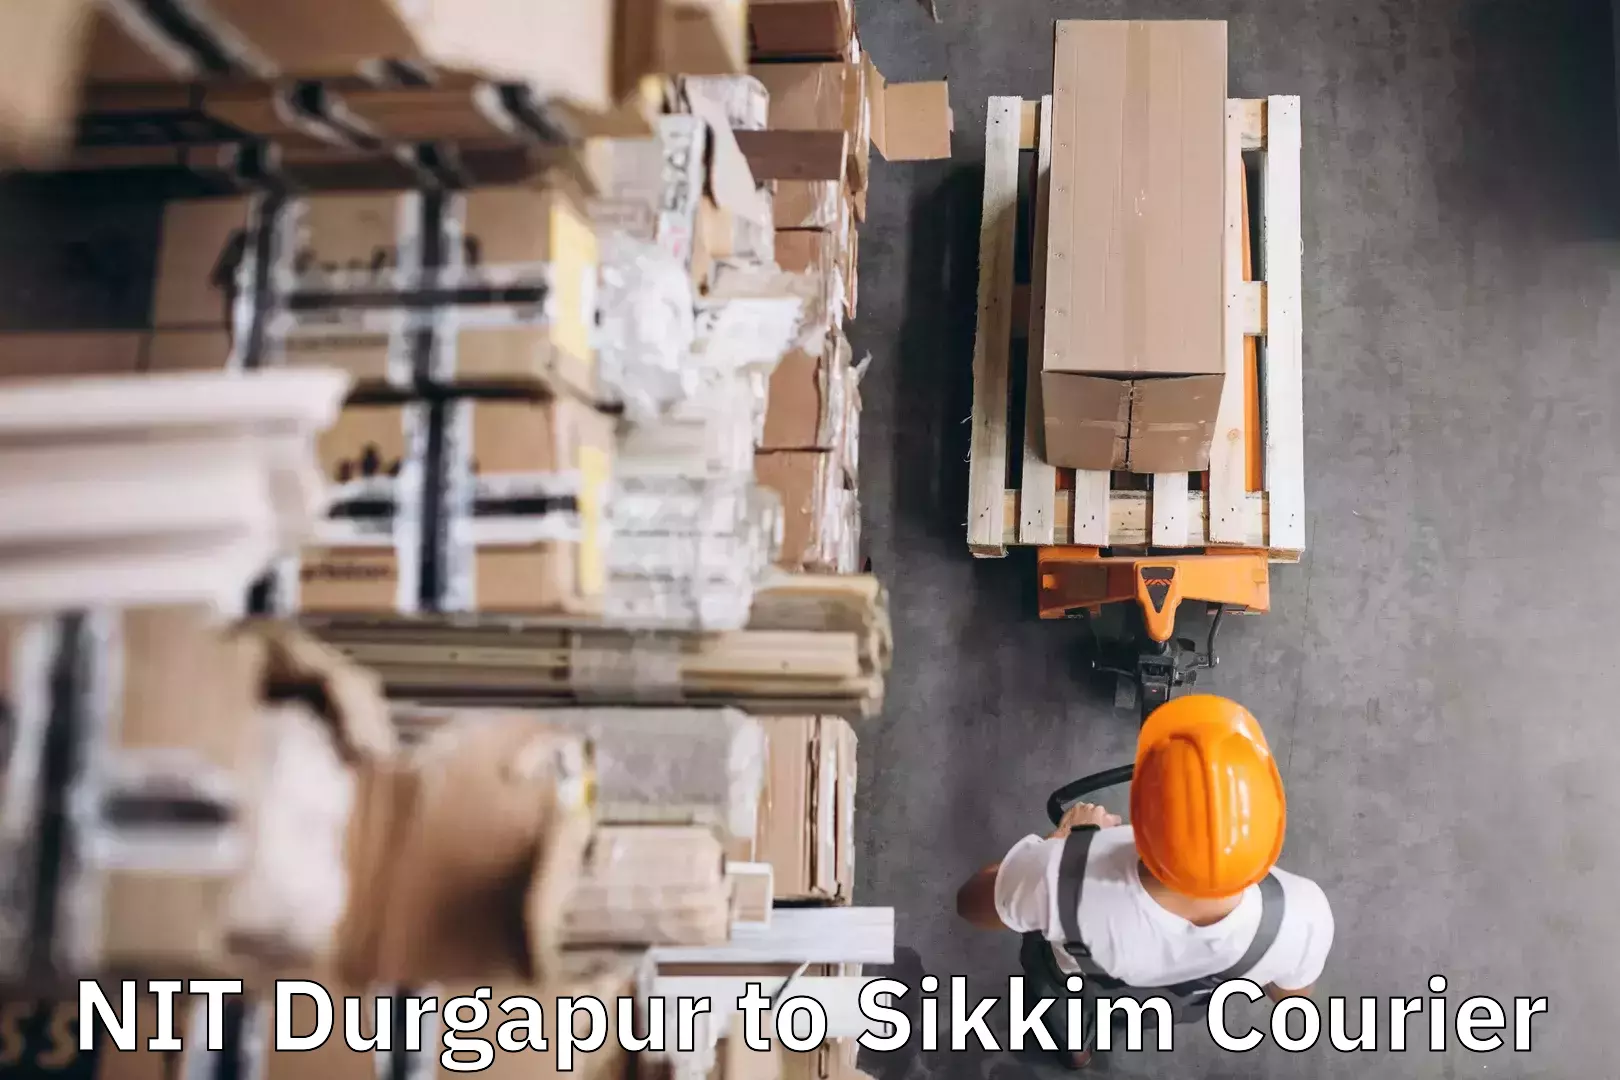 Luggage shipment processing in NIT Durgapur to East Sikkim